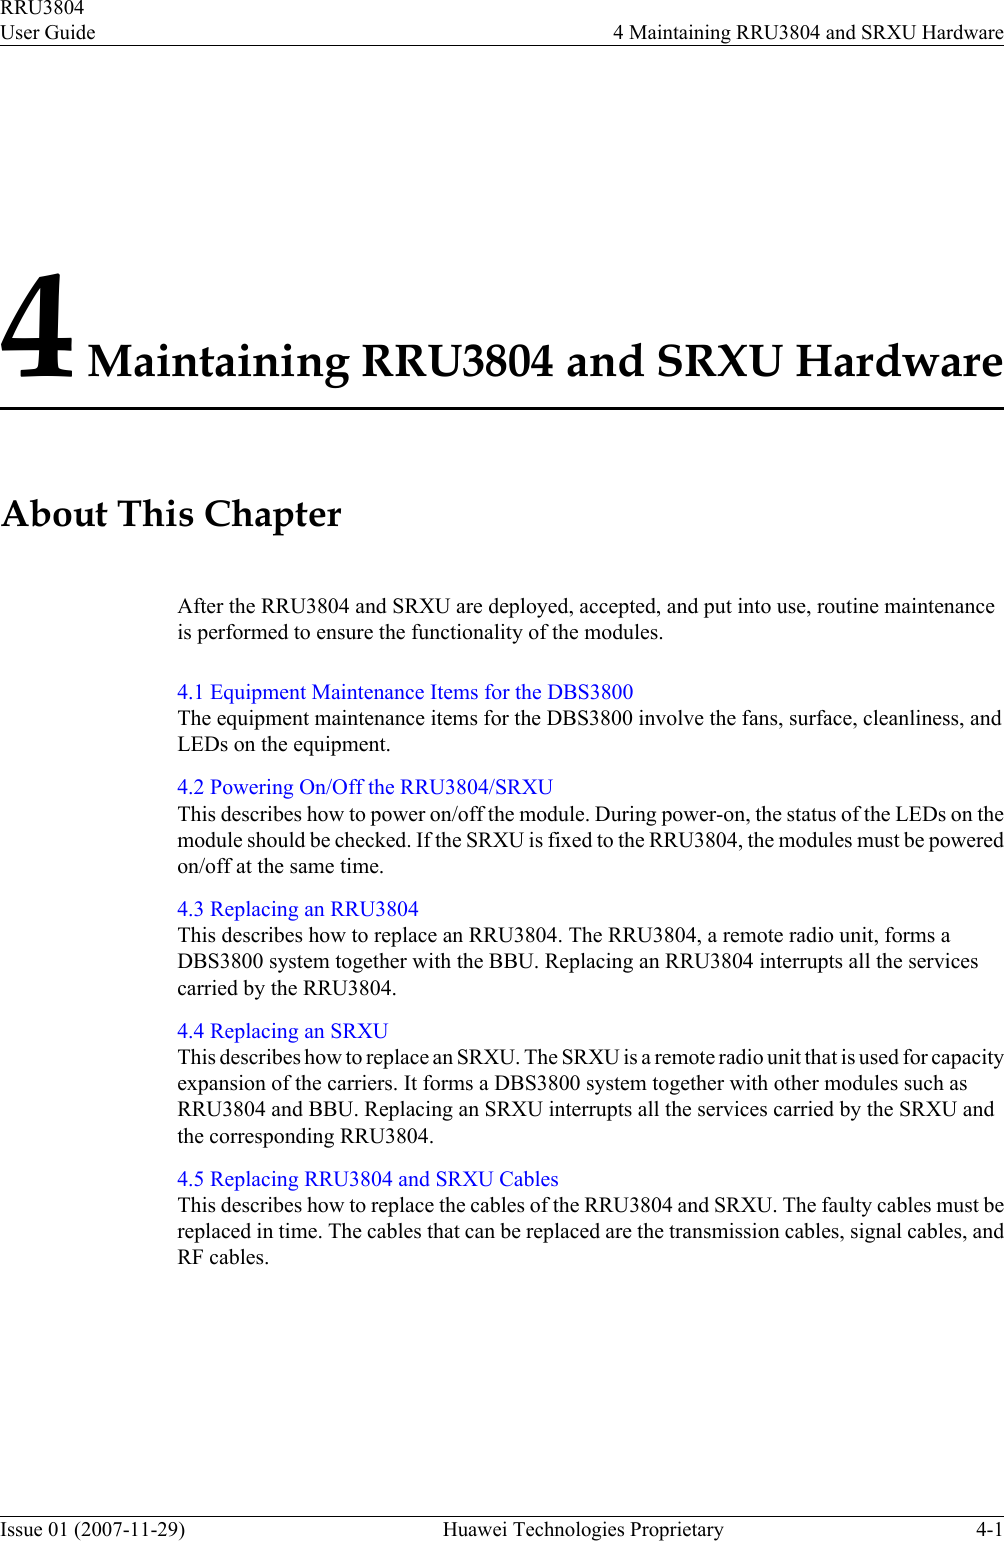 4 Maintaining RRU3804 and SRXU HardwareAbout This ChapterAfter the RRU3804 and SRXU are deployed, accepted, and put into use, routine maintenanceis performed to ensure the functionality of the modules.4.1 Equipment Maintenance Items for the DBS3800The equipment maintenance items for the DBS3800 involve the fans, surface, cleanliness, andLEDs on the equipment.4.2 Powering On/Off the RRU3804/SRXUThis describes how to power on/off the module. During power-on, the status of the LEDs on themodule should be checked. If the SRXU is fixed to the RRU3804, the modules must be poweredon/off at the same time.4.3 Replacing an RRU3804This describes how to replace an RRU3804. The RRU3804, a remote radio unit, forms aDBS3800 system together with the BBU. Replacing an RRU3804 interrupts all the servicescarried by the RRU3804.4.4 Replacing an SRXUThis describes how to replace an SRXU. The SRXU is a remote radio unit that is used for capacityexpansion of the carriers. It forms a DBS3800 system together with other modules such asRRU3804 and BBU. Replacing an SRXU interrupts all the services carried by the SRXU andthe corresponding RRU3804.4.5 Replacing RRU3804 and SRXU CablesThis describes how to replace the cables of the RRU3804 and SRXU. The faulty cables must bereplaced in time. The cables that can be replaced are the transmission cables, signal cables, andRF cables.RRU3804User Guide 4 Maintaining RRU3804 and SRXU HardwareIssue 01 (2007-11-29)  Huawei Technologies Proprietary 4-1